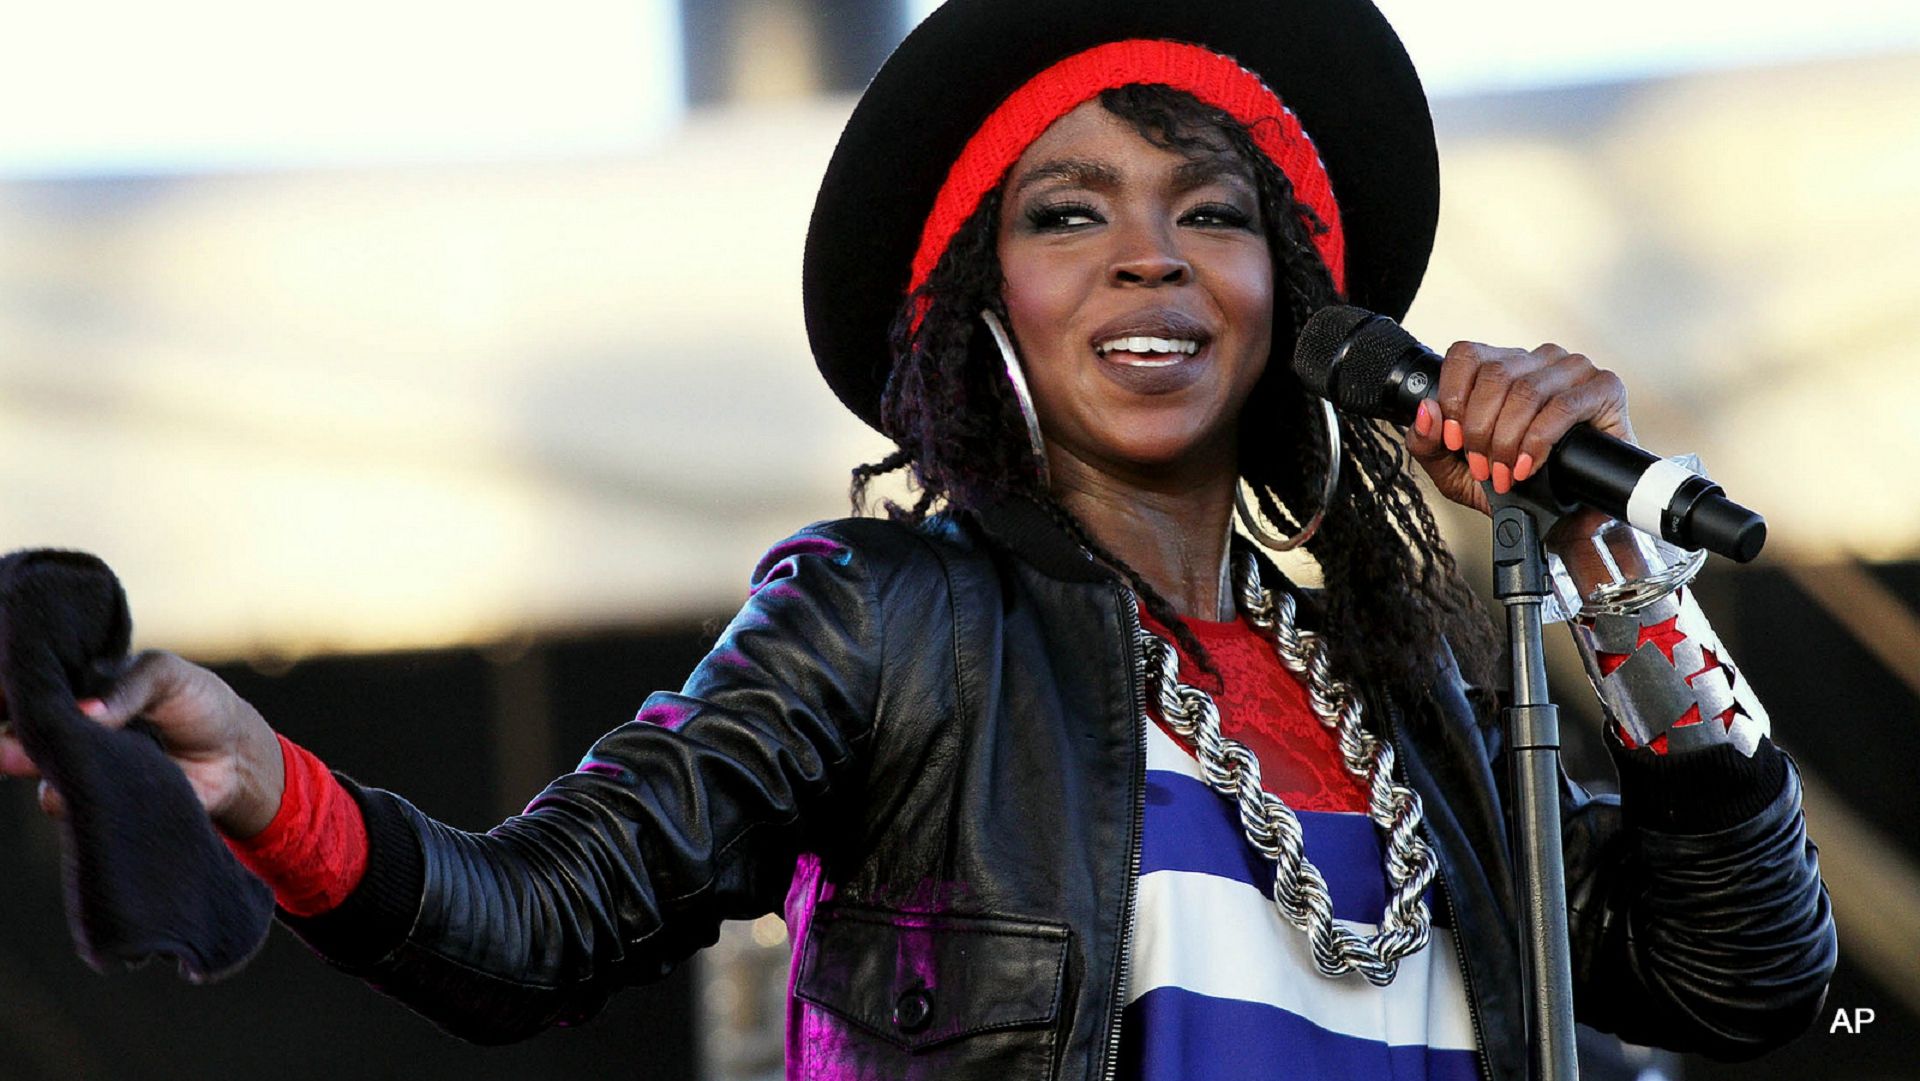 Lauryn Hill Wallpaper Image Photo Picture Background